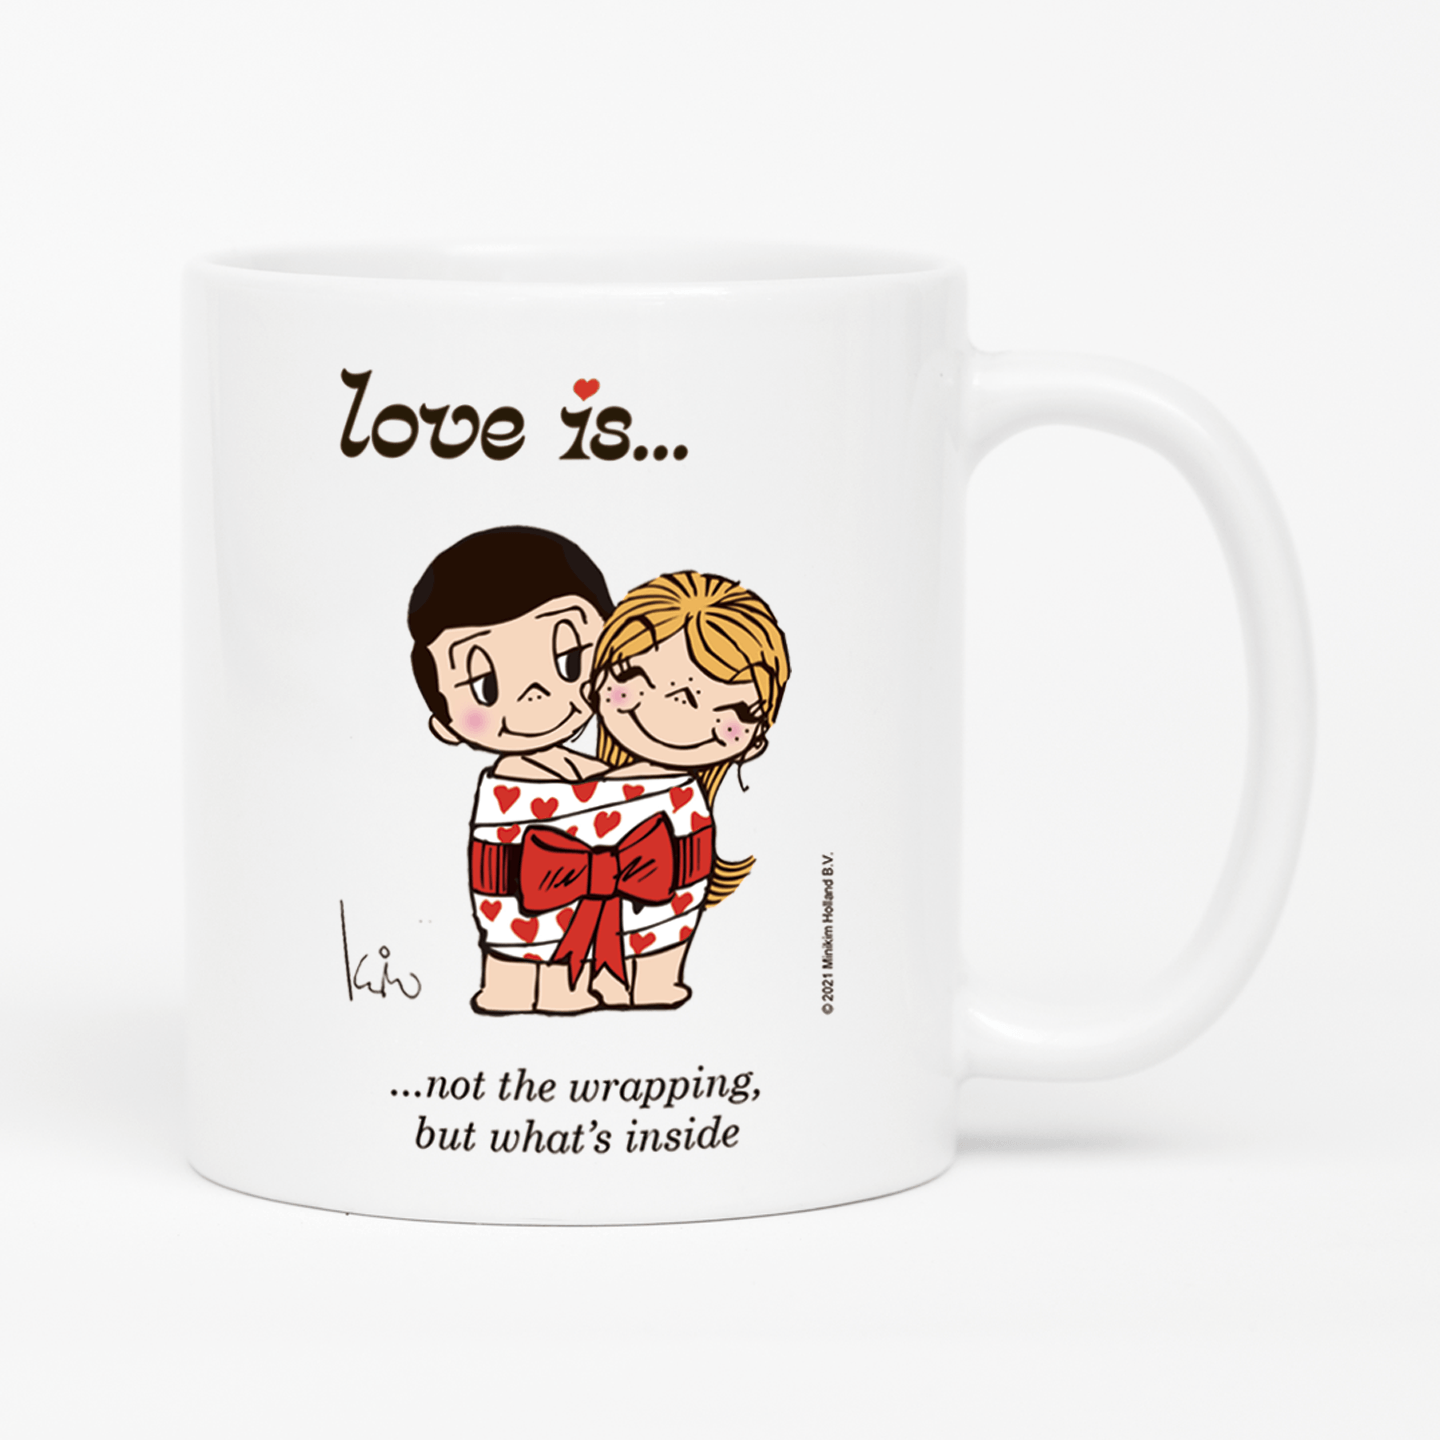 Front view: Love is... not the wrapping, but what's inside  personalized ceramic mug by Kim Casali. 